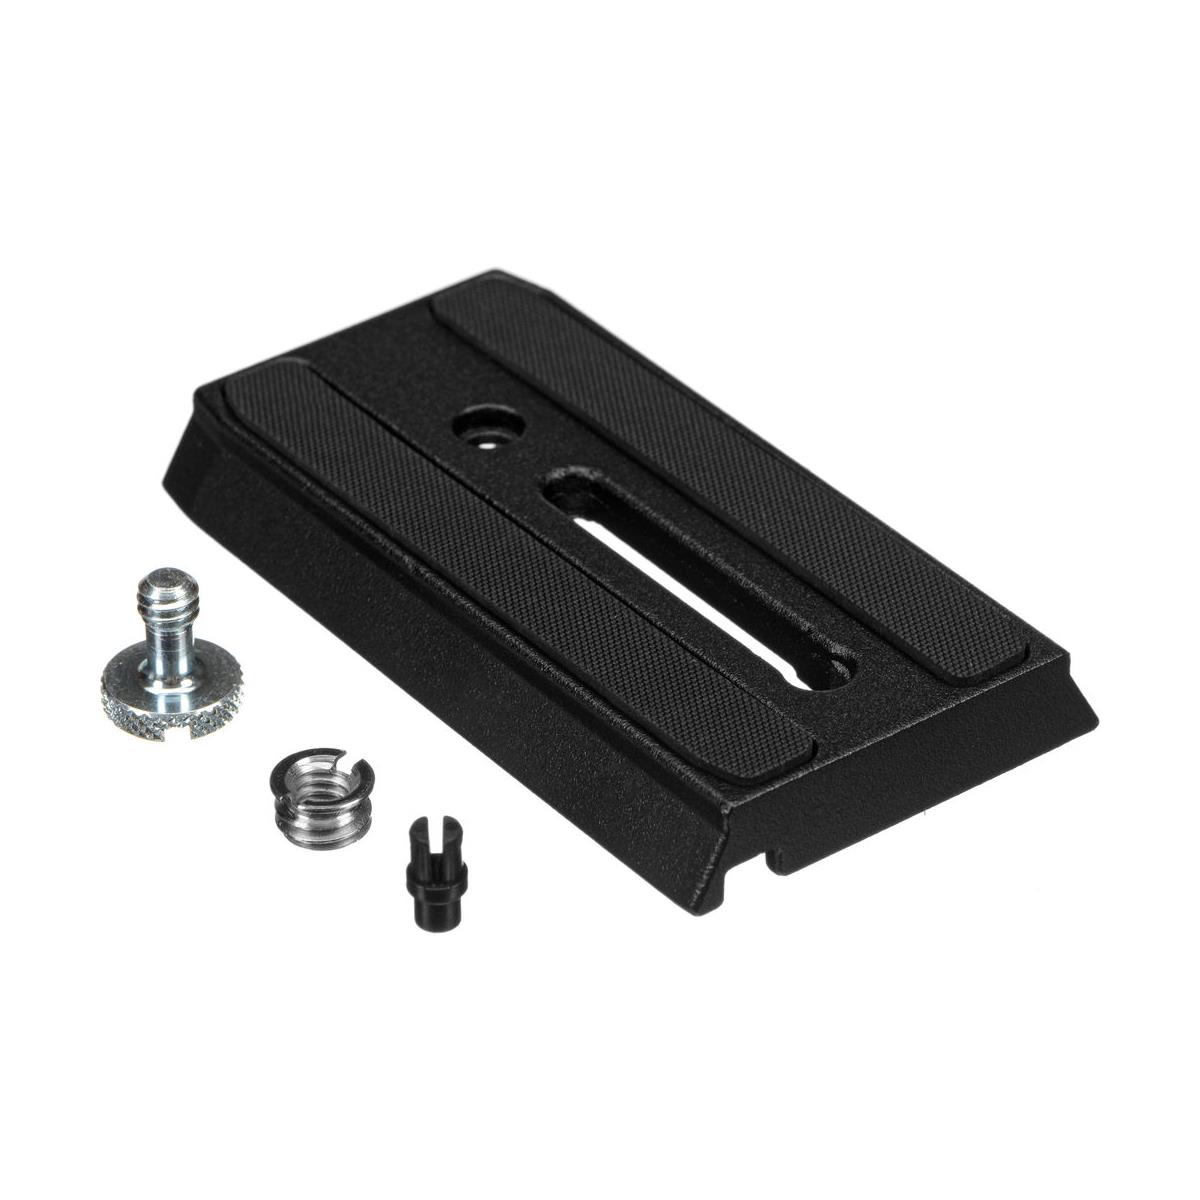 Manfrotto 501PL Sliding Quick Release  Plate with 1/4"-20 & 3/8" Screws